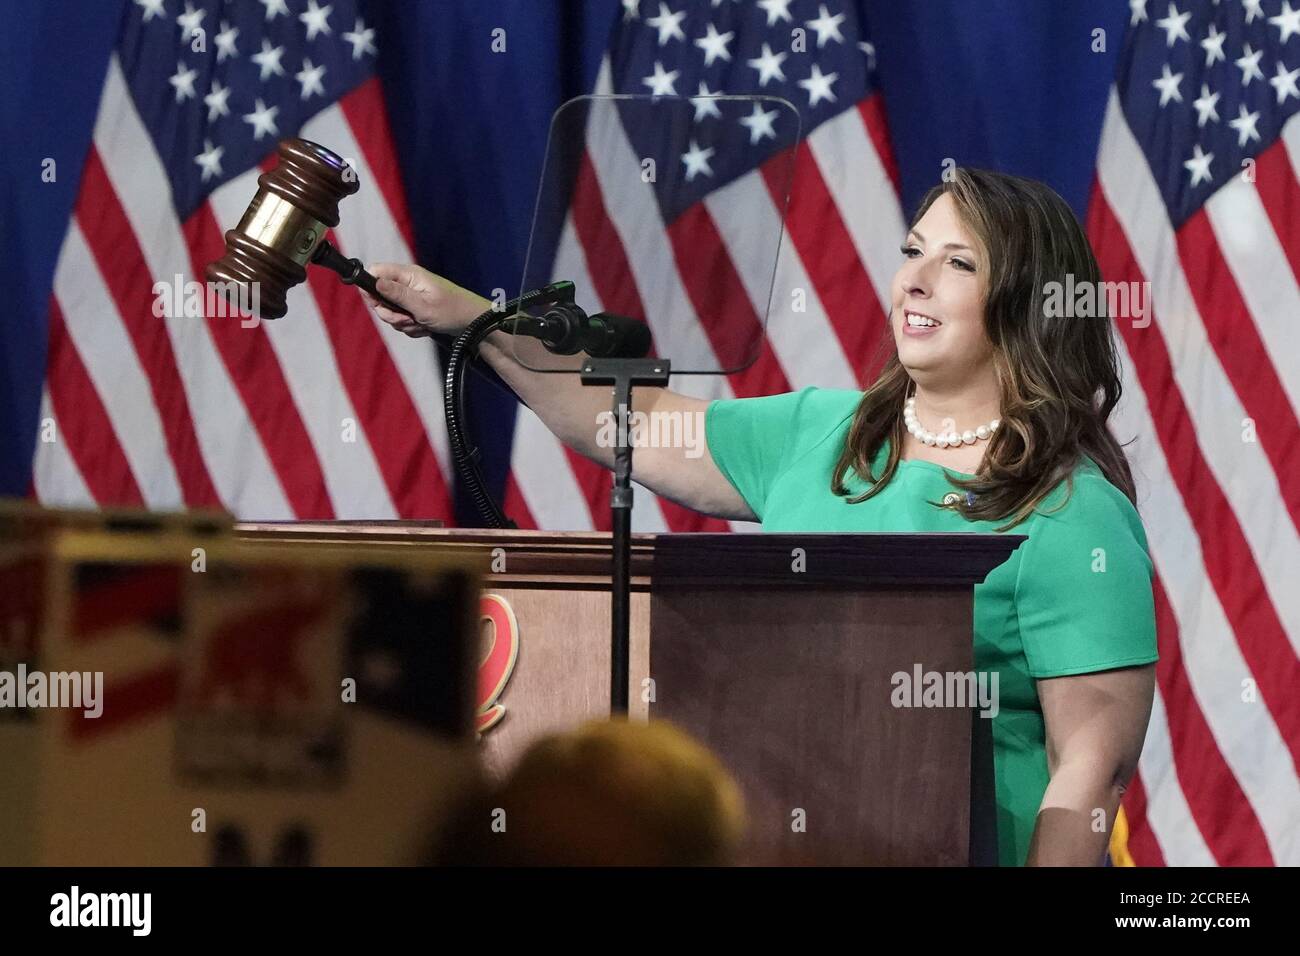 Charlotte, United States. 24th Aug, 2020. Republican National Committee Chairwoman Ronna McDaniel gavels the call-to-order at the opening of the first day of the Republican National Convention on Monday, August 24, 2020, in Charlotte, North Carolina. The four-day event will start with 336 delegates gathering to nominate President Donald Trump for a second term. Pool Photo by Chris Carlson/UPI Credit: UPI/Alamy Live News Stock Photo